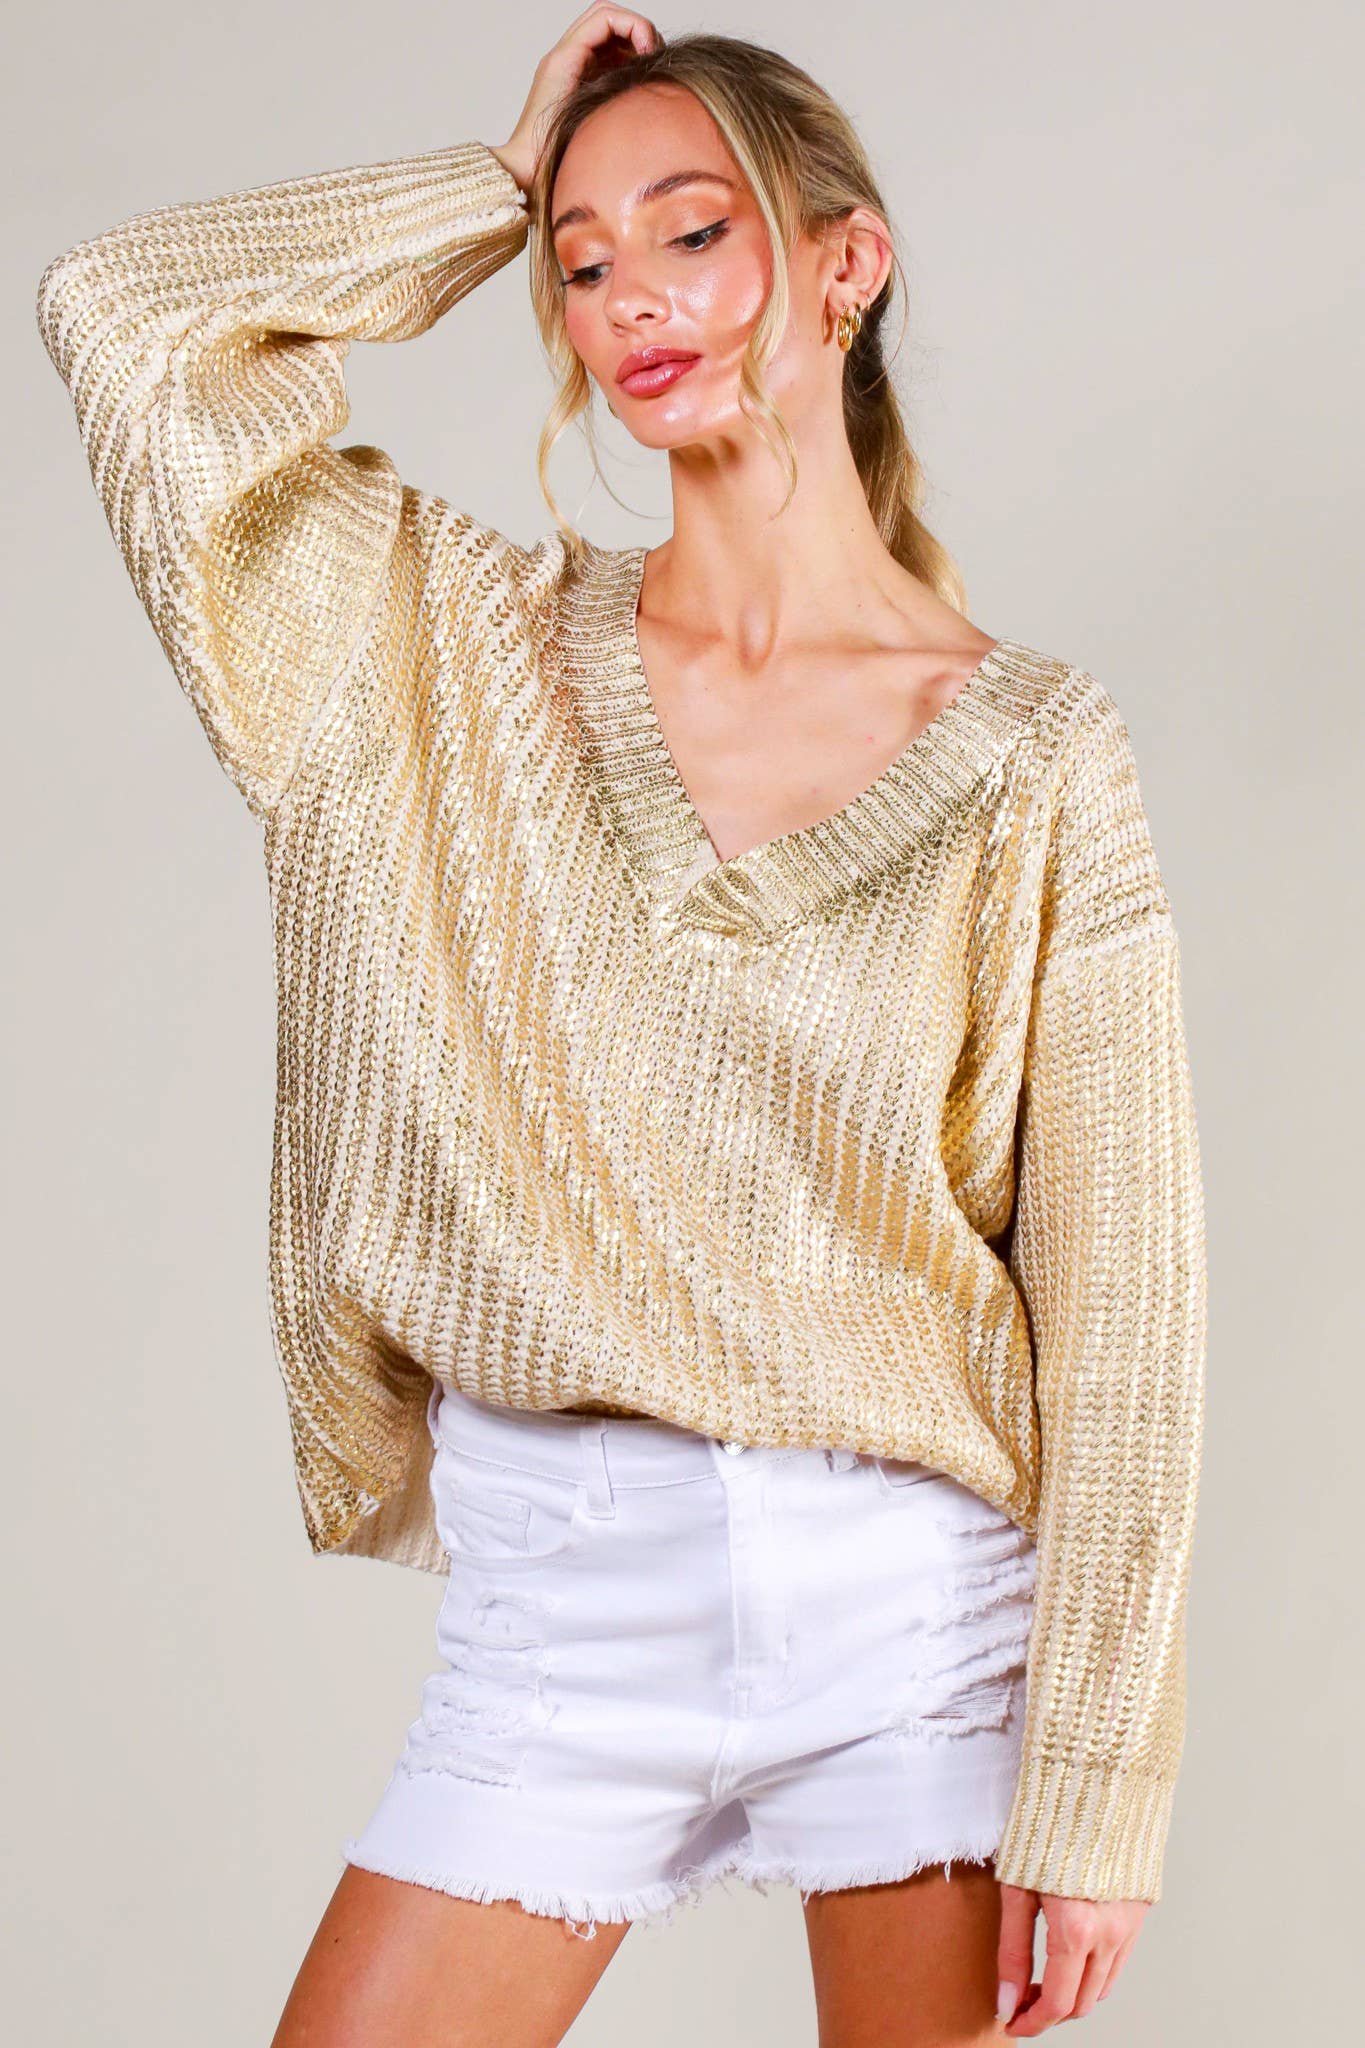 Buy Golden Ticket Super Savers Cami Crop Sweater Pullover Top and